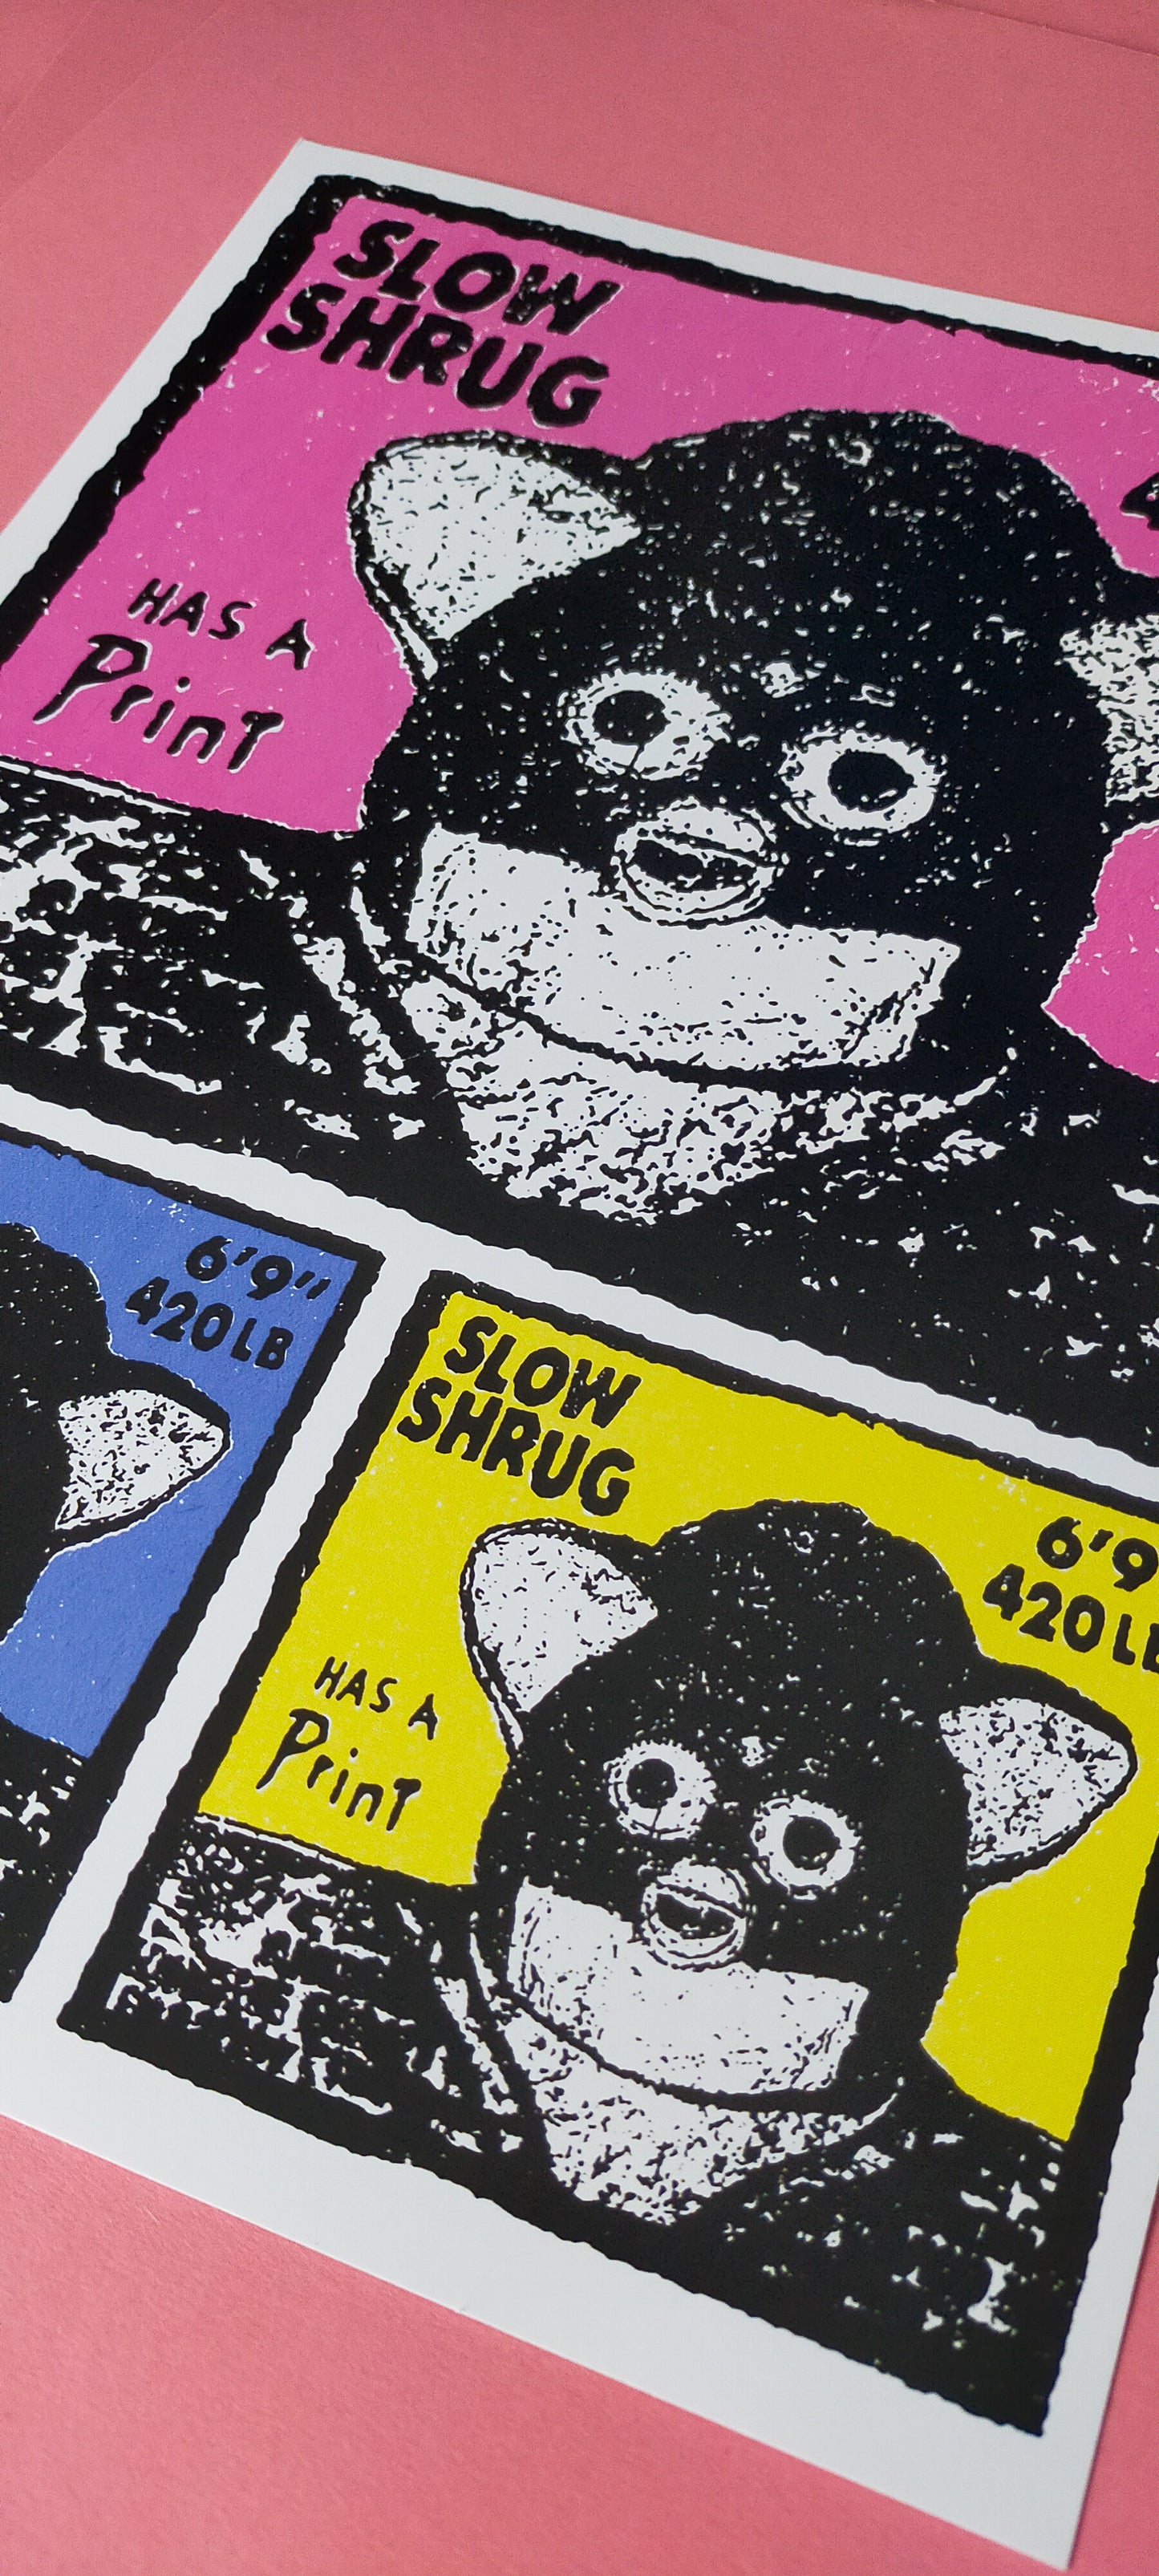 Slow Shrug Has a Print [pink colourway, SIGNED]